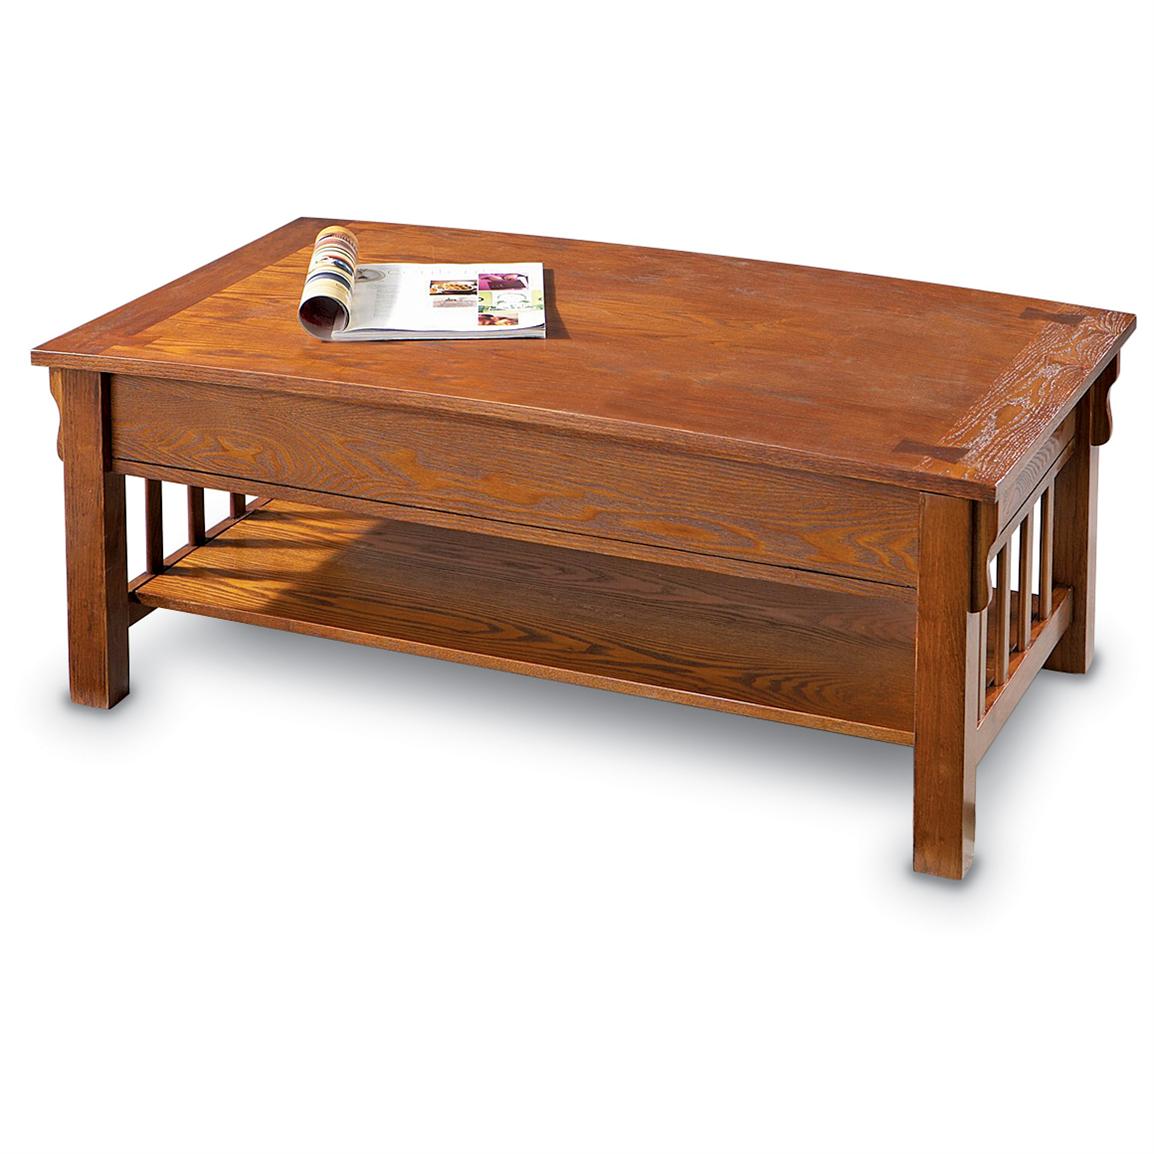 Castlecreek Mission Style Lift Top Coffee Table 281544 Living